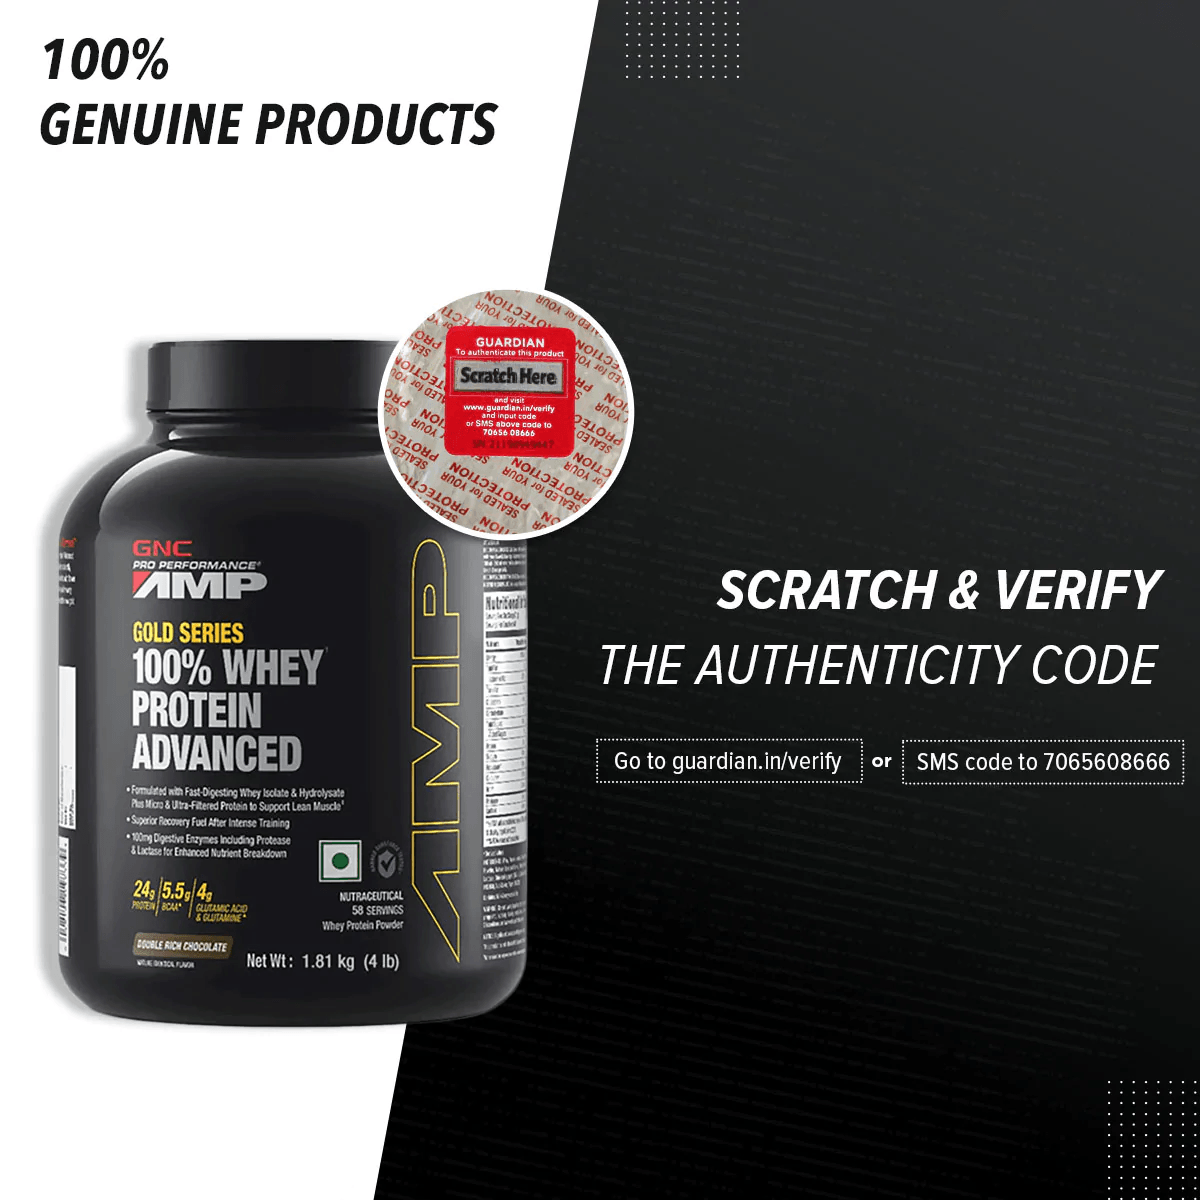 GNC AMP Gold Series 100% Whey 4.4 lbs - The Muscle Kart.com